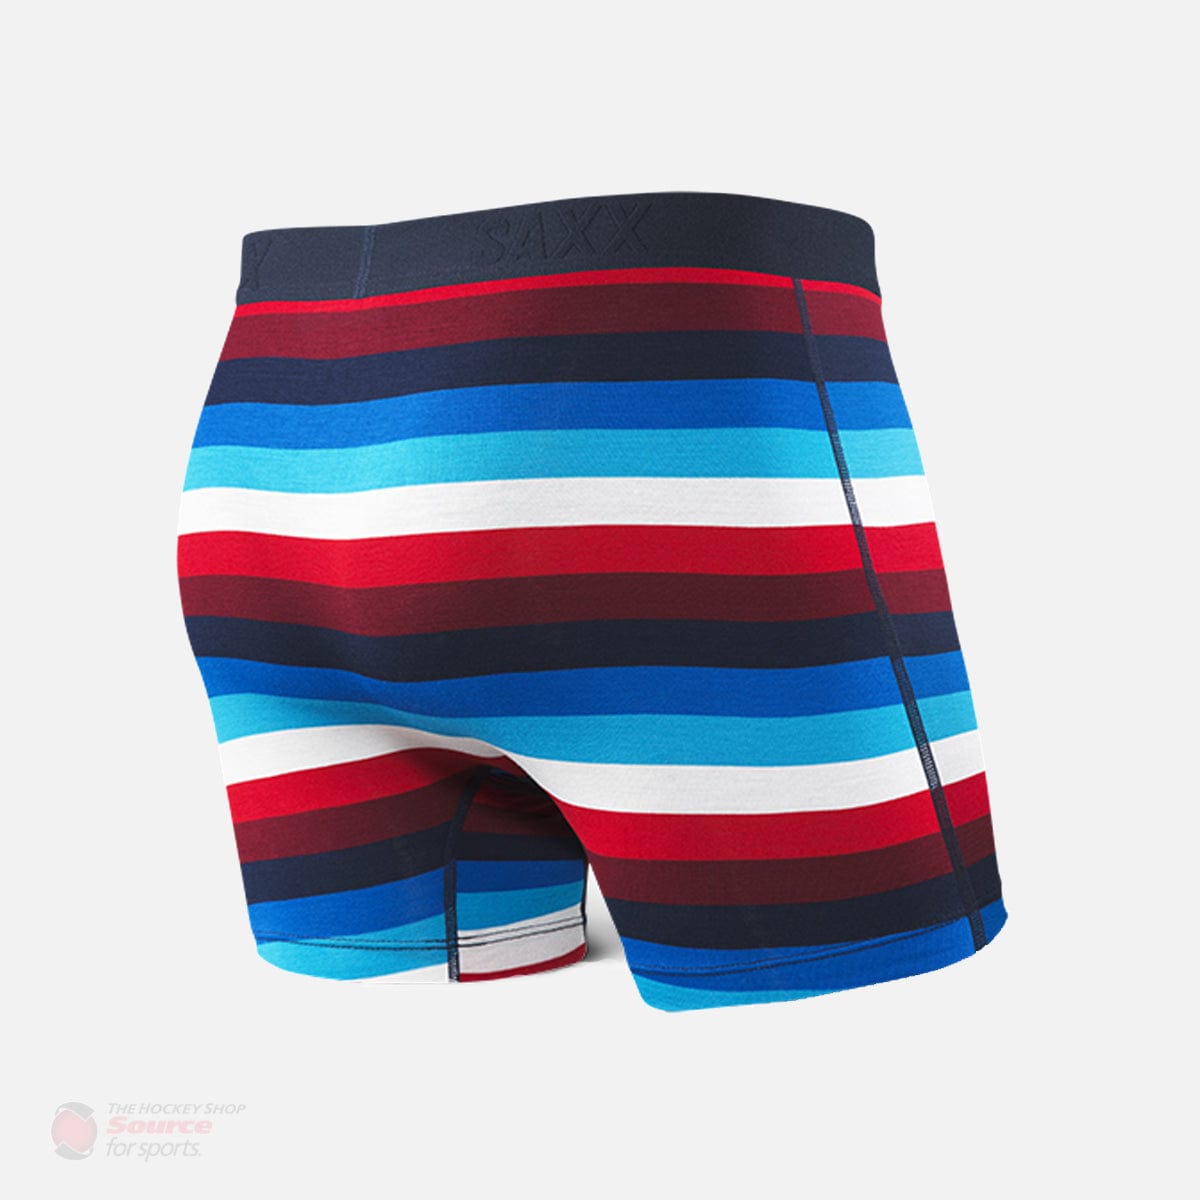 Saxx Ultra Boxers - Navy / Red